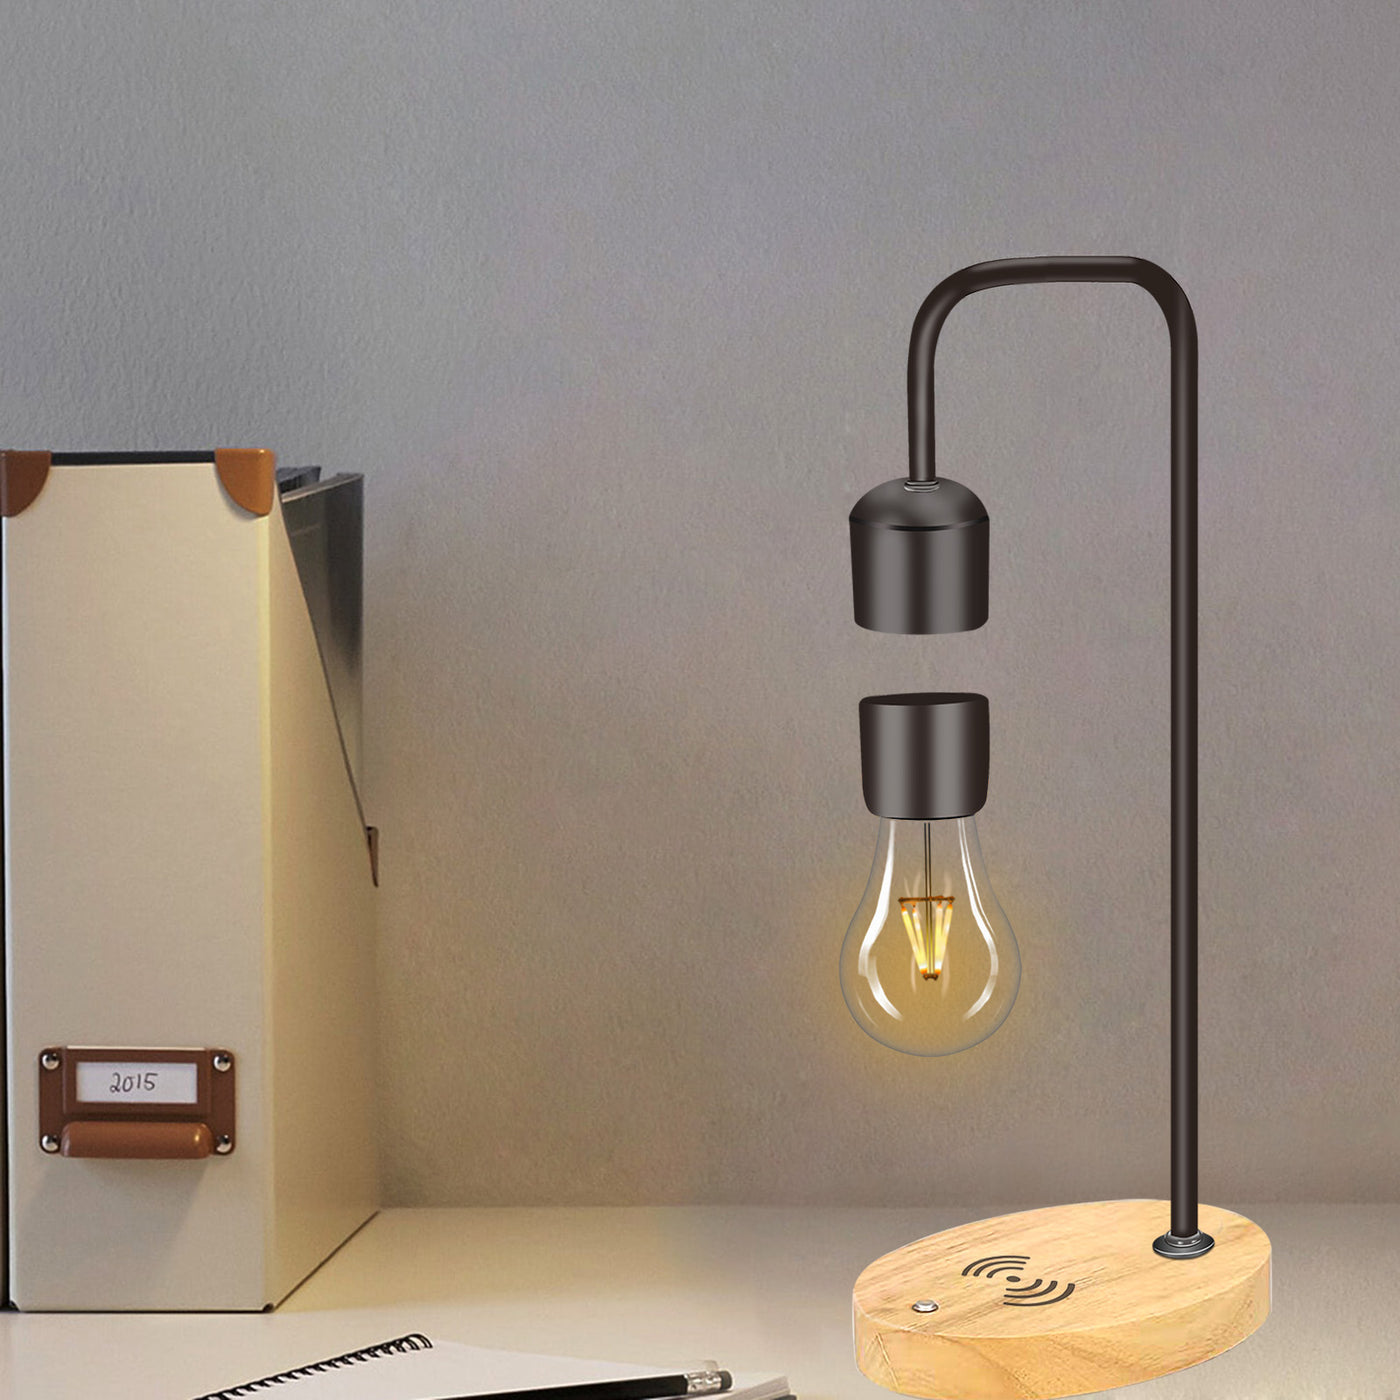 LANGTU Table Desk Smart Lamp with Magnetic Levitating Floating Wireless LED Light Bulb and Wireless Charger Base Maple